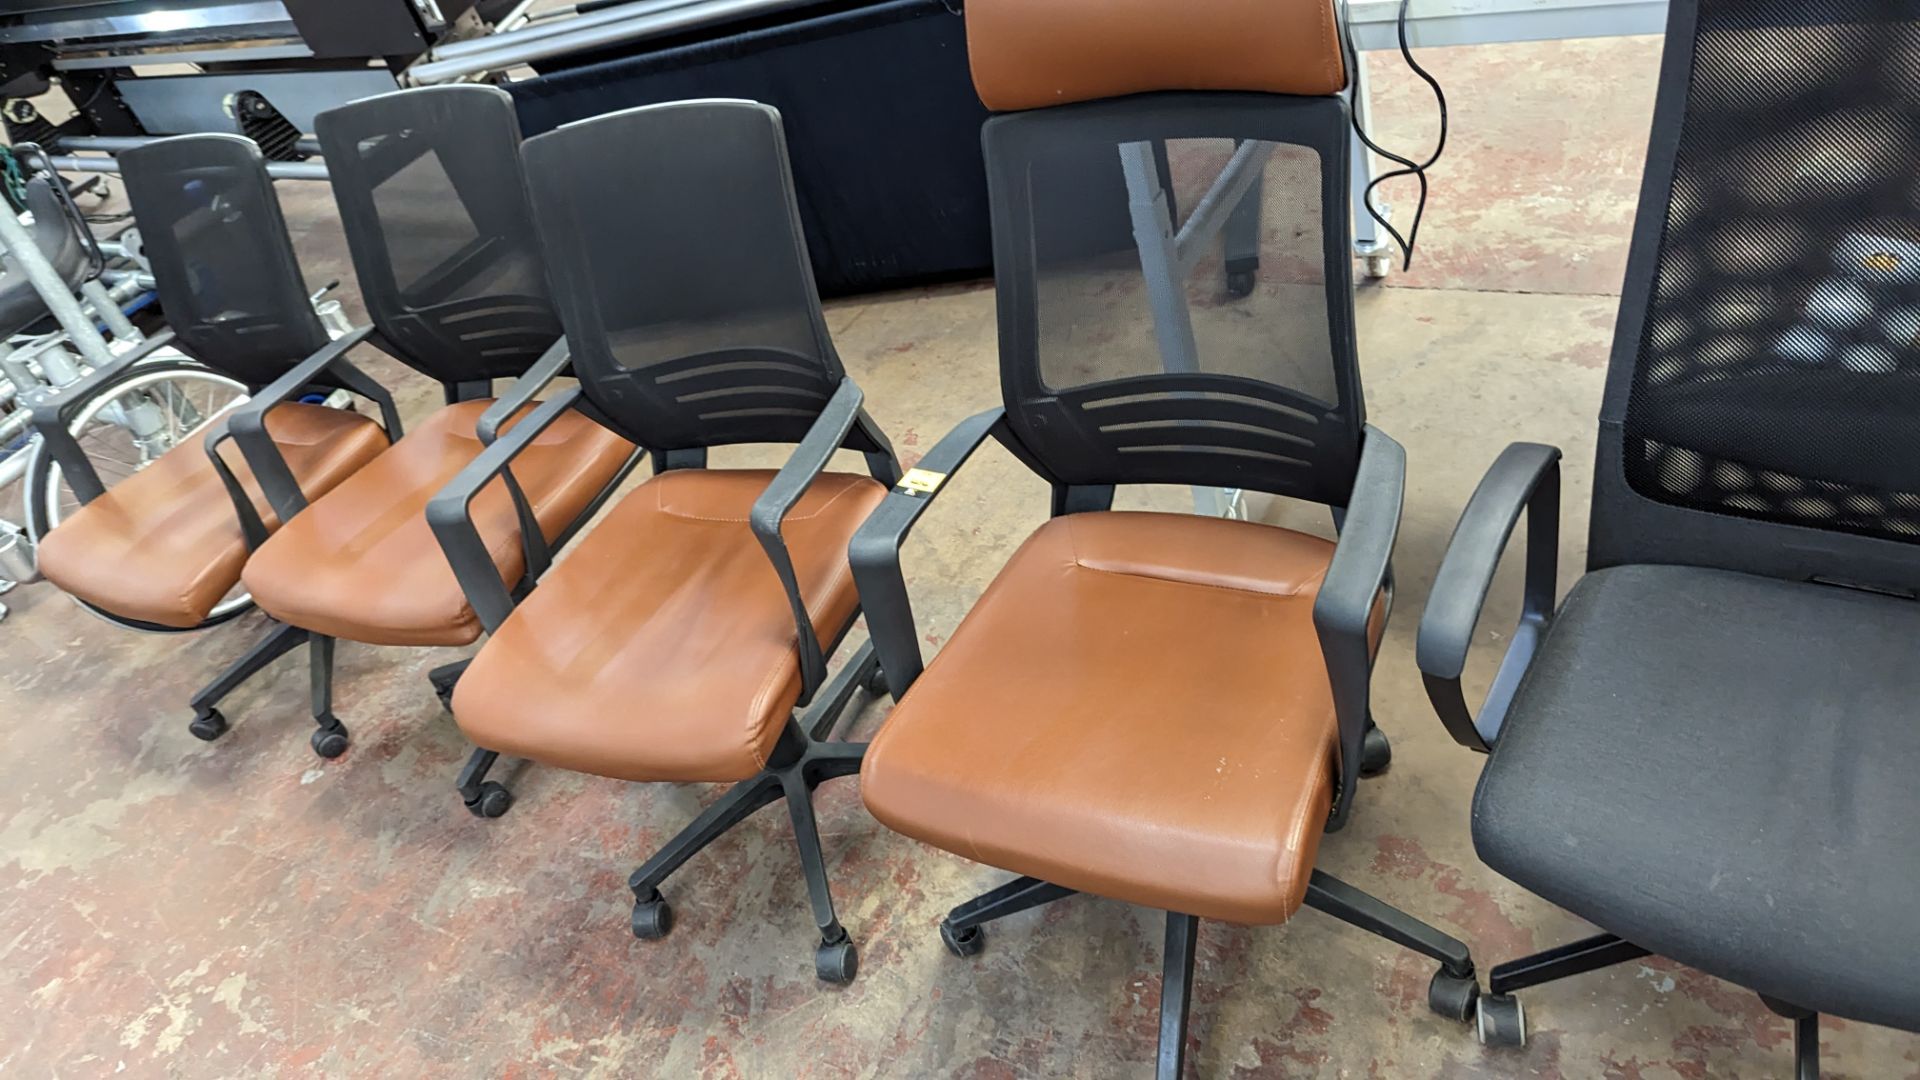 4 off matching modern mesh back chairs with brown leather/leather look seat bases, one of which has